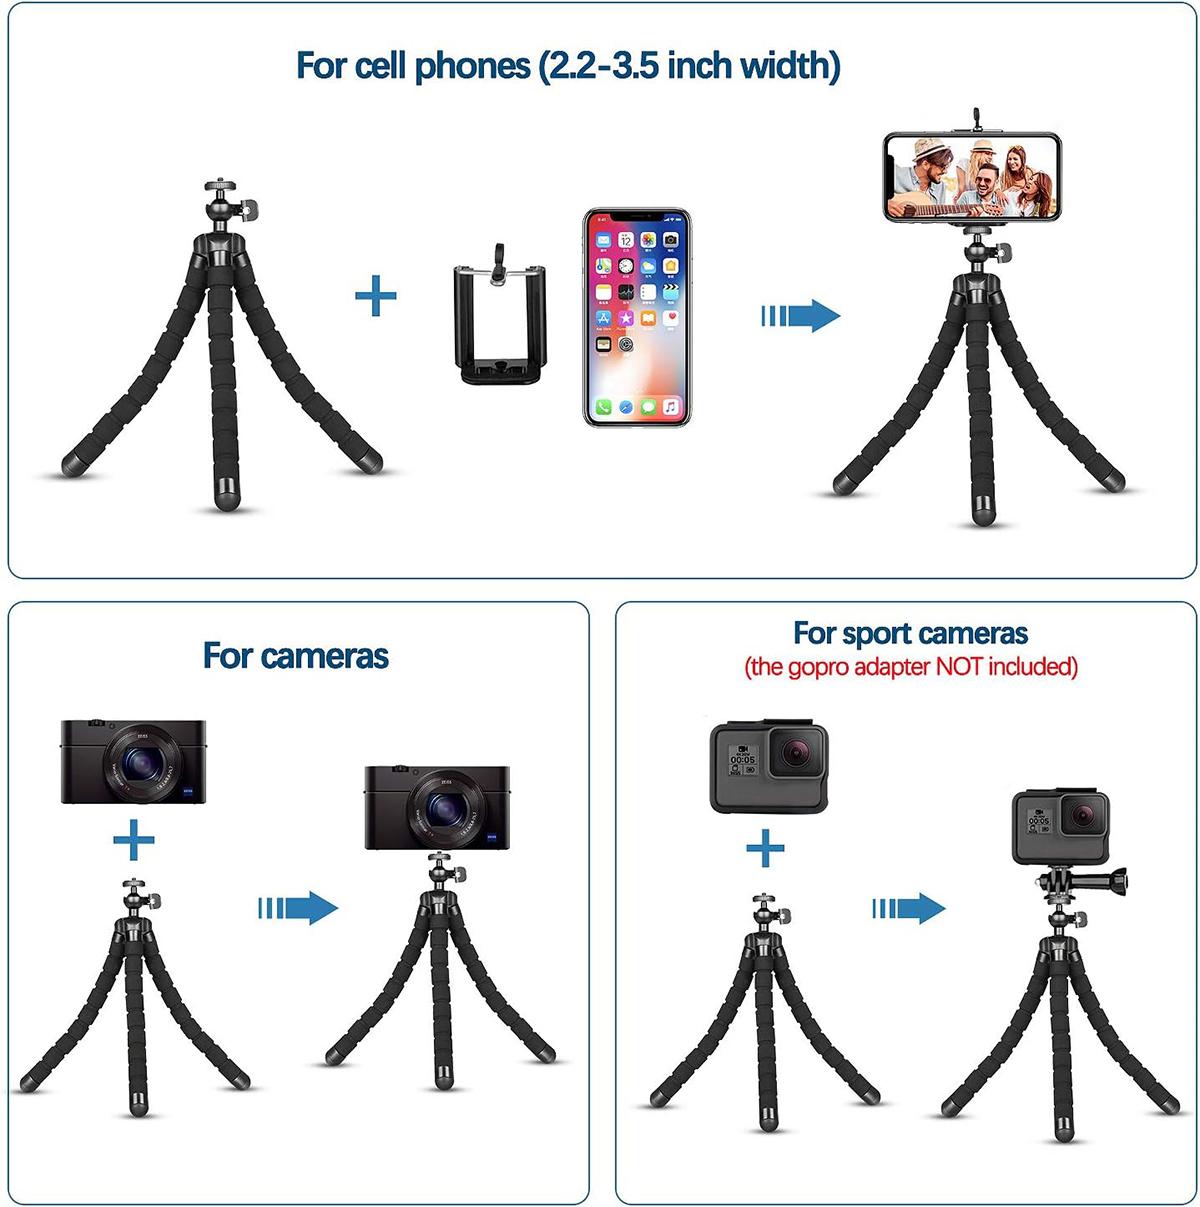 Adjustable Tripod Stand Flexible Octopus Holder for iPhone Camera